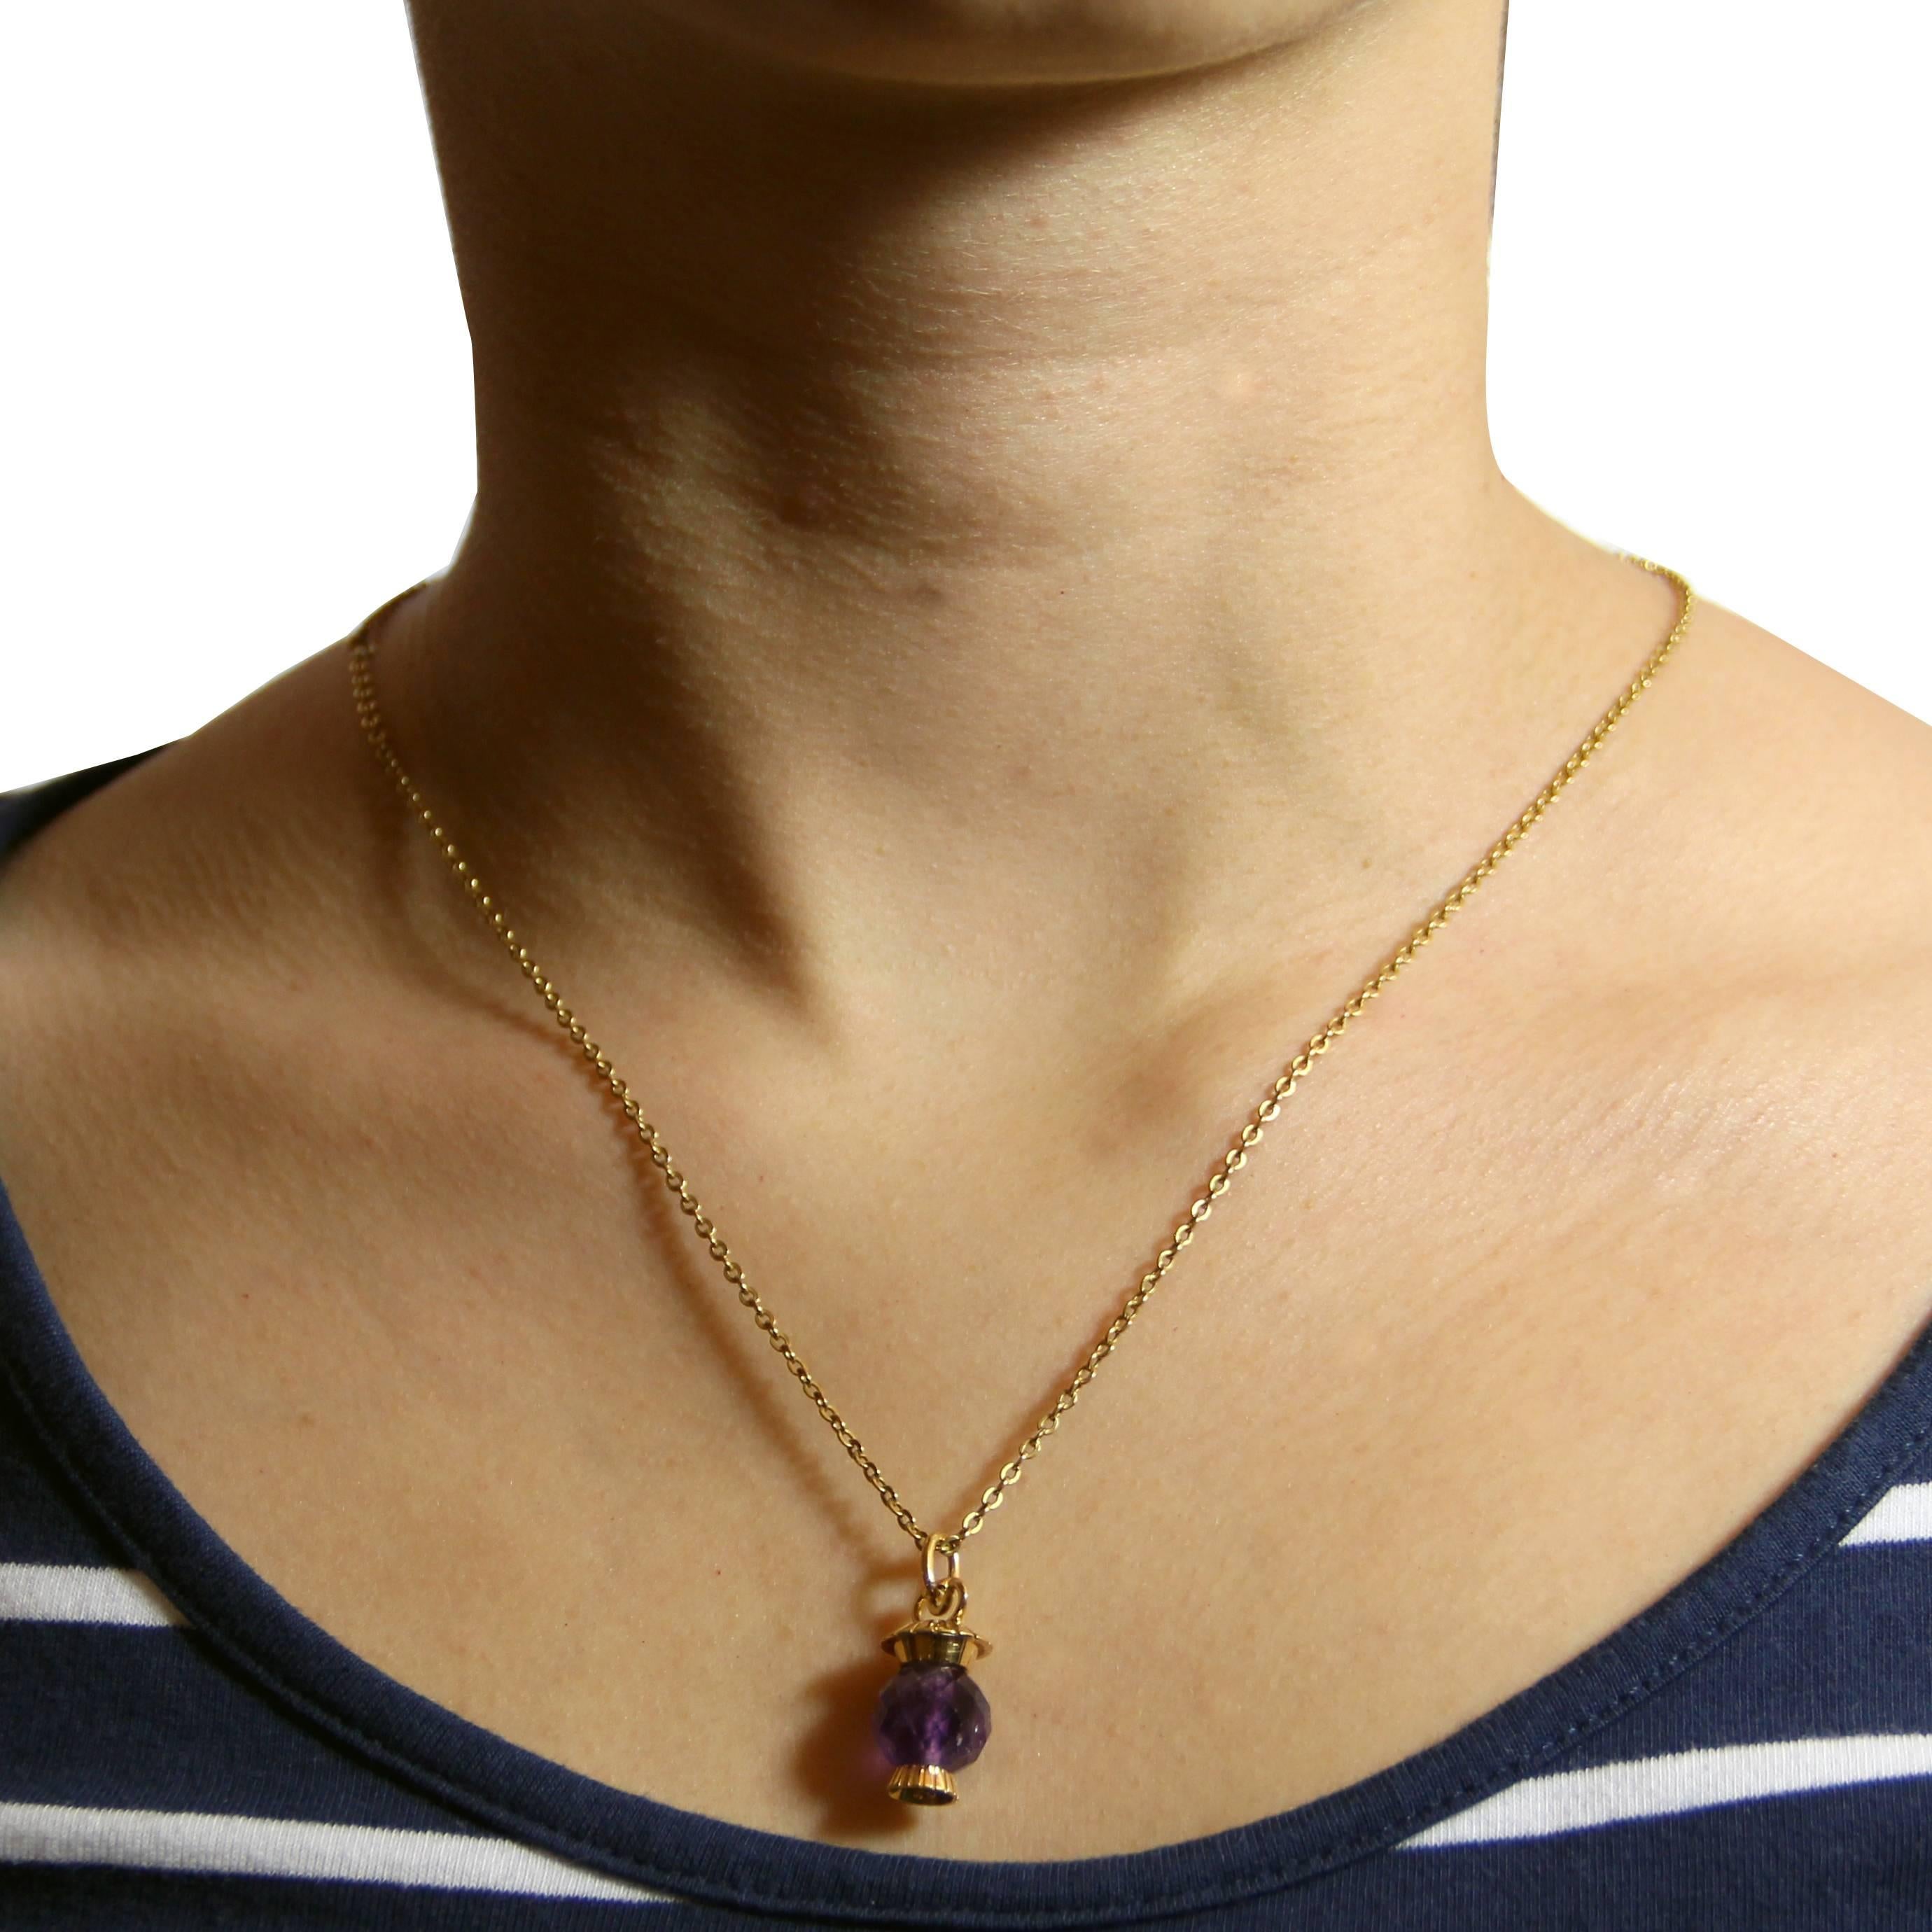 Pendant in 18 carats yellow gold, eagle's head hallmark.
This lovely retro pendant holds between two gold caps carved a faceted amethyst pearl giving it the shapes of a lantern. An oblong ring constitutes the bail.
Total height: 2.5 cm, width at the